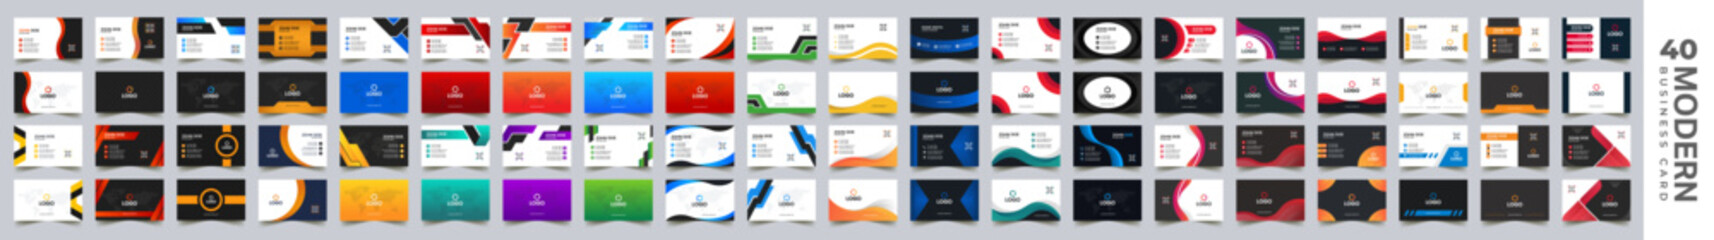 Set of 40 modern business card print templates, double-sided business card design template, Creative and clean corporate business card template, Luxury and elegant business card design template - Powered by Adobe